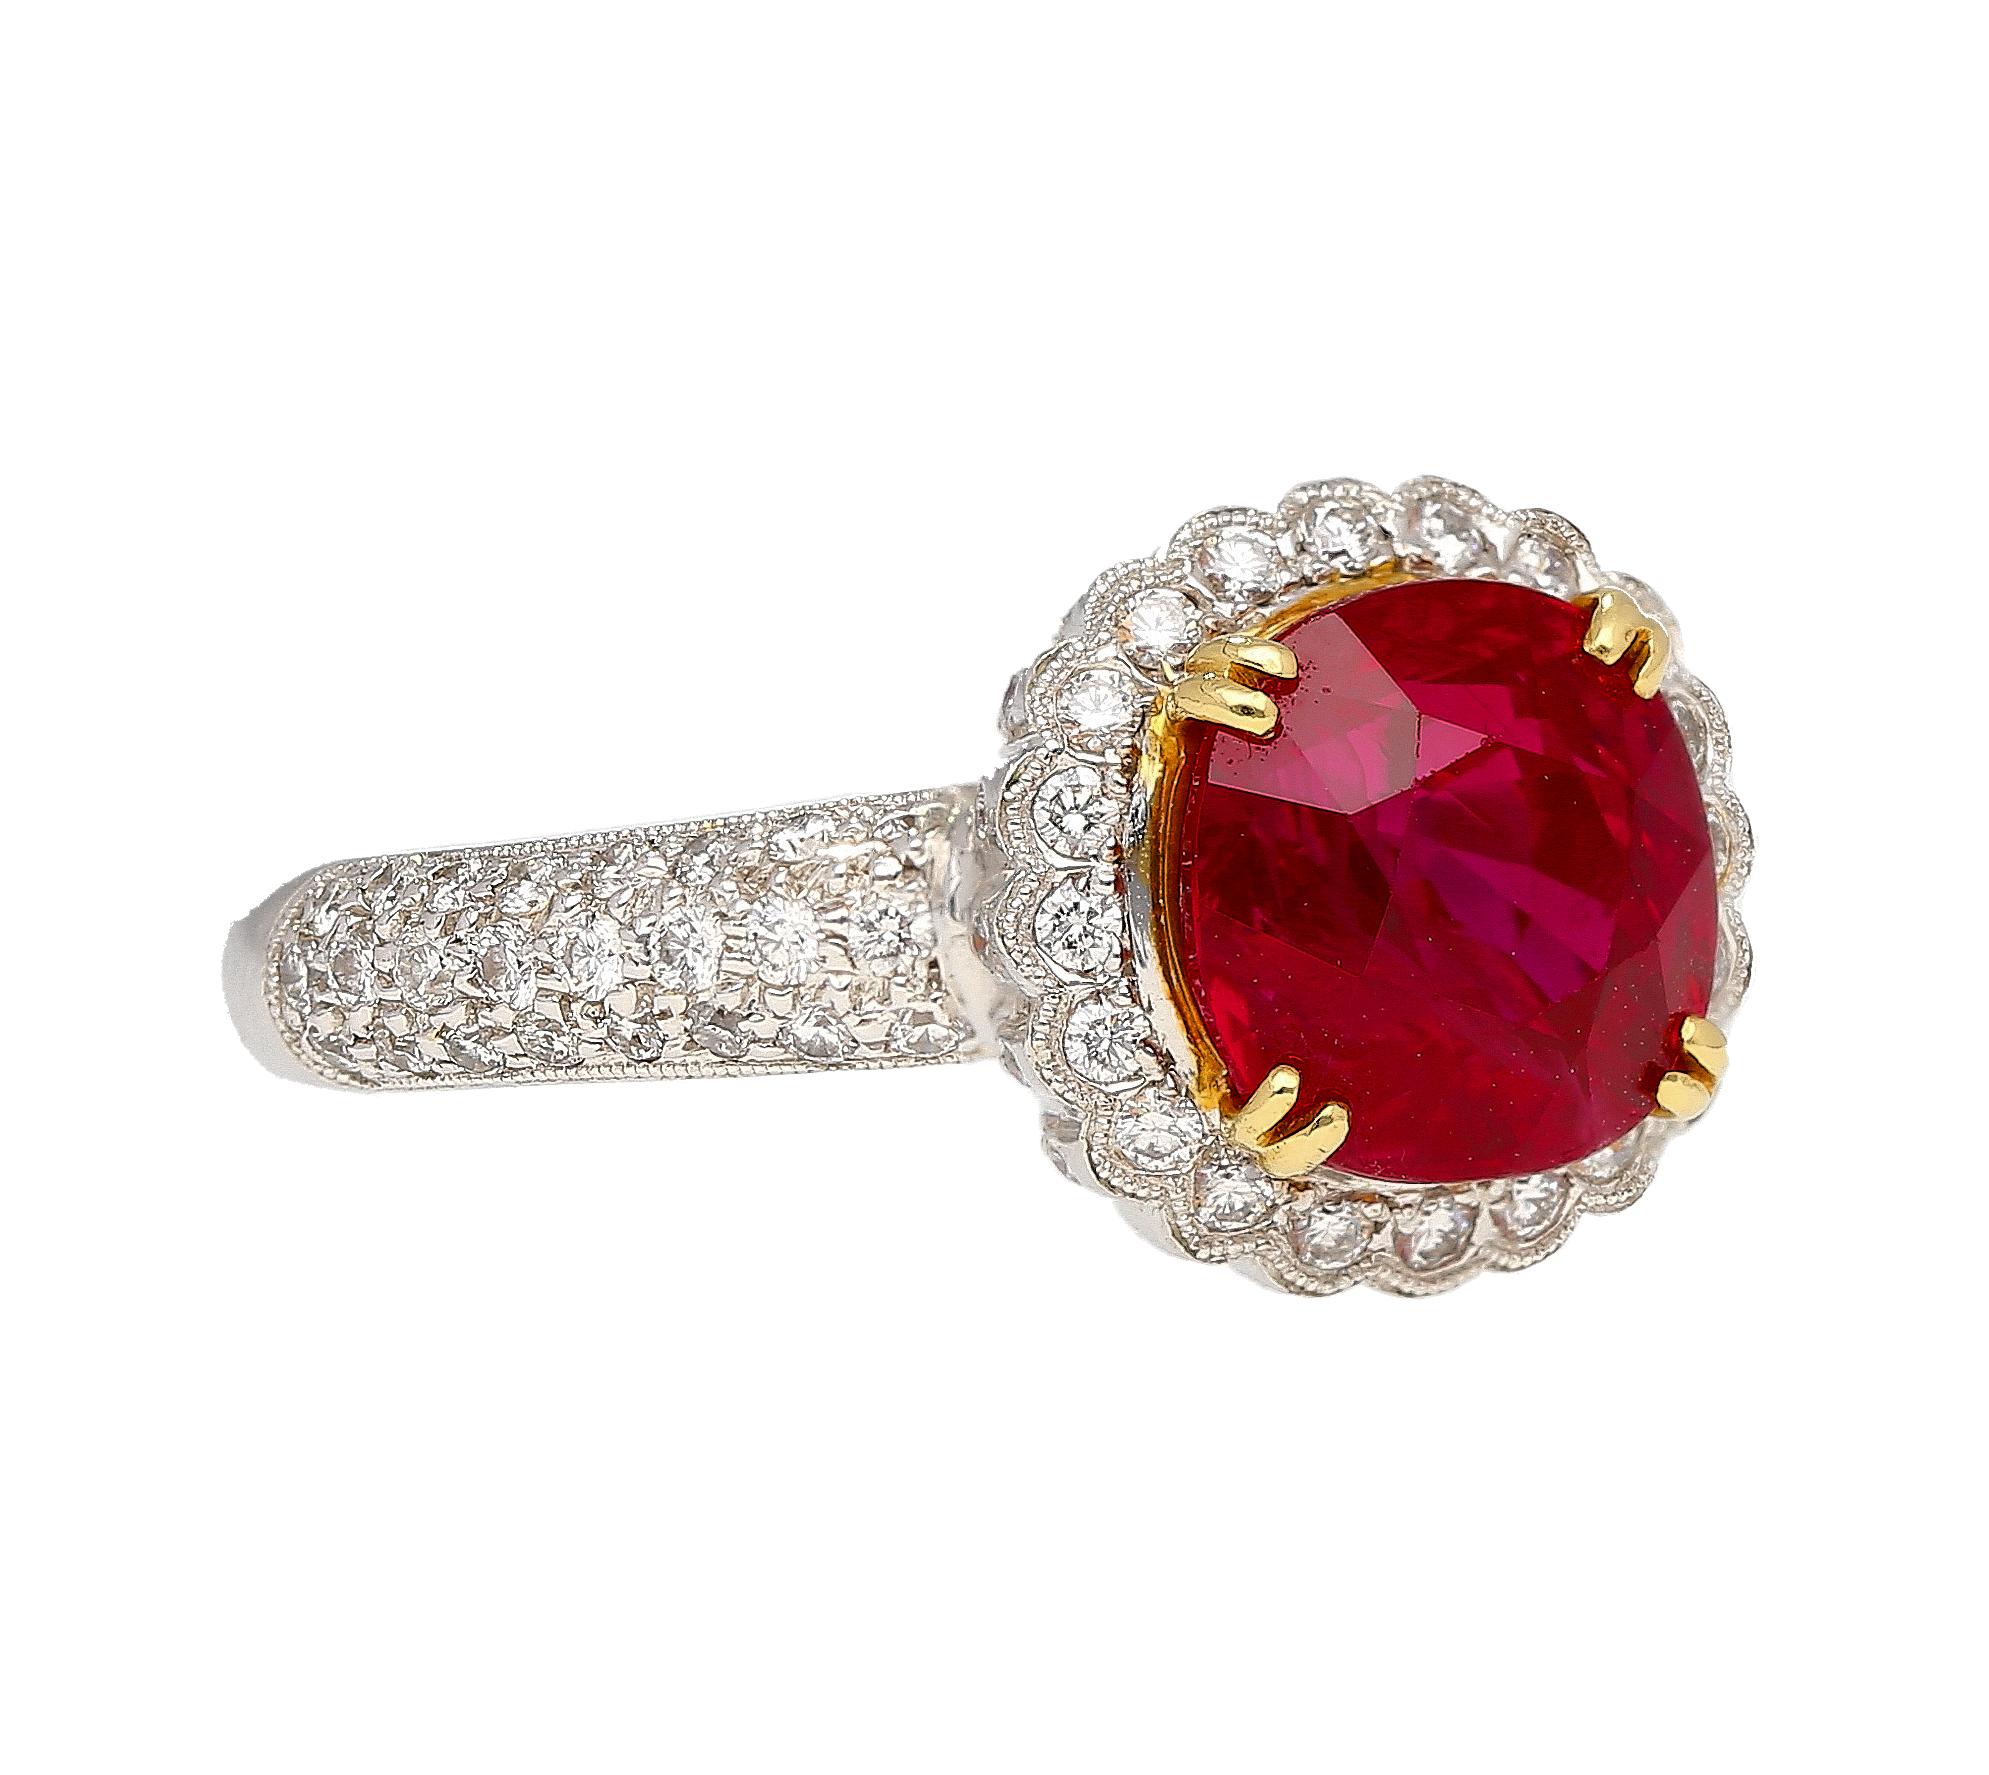 3.02 carat cushion cut Ruby and round diamond ring. The 3-carat center stone is certified by Gubelin Gem Lab to be natural, transparent, of Burmese origin, and have traditional heat treatment. The shank is set in platinum 900 and the 6 prongs are 18